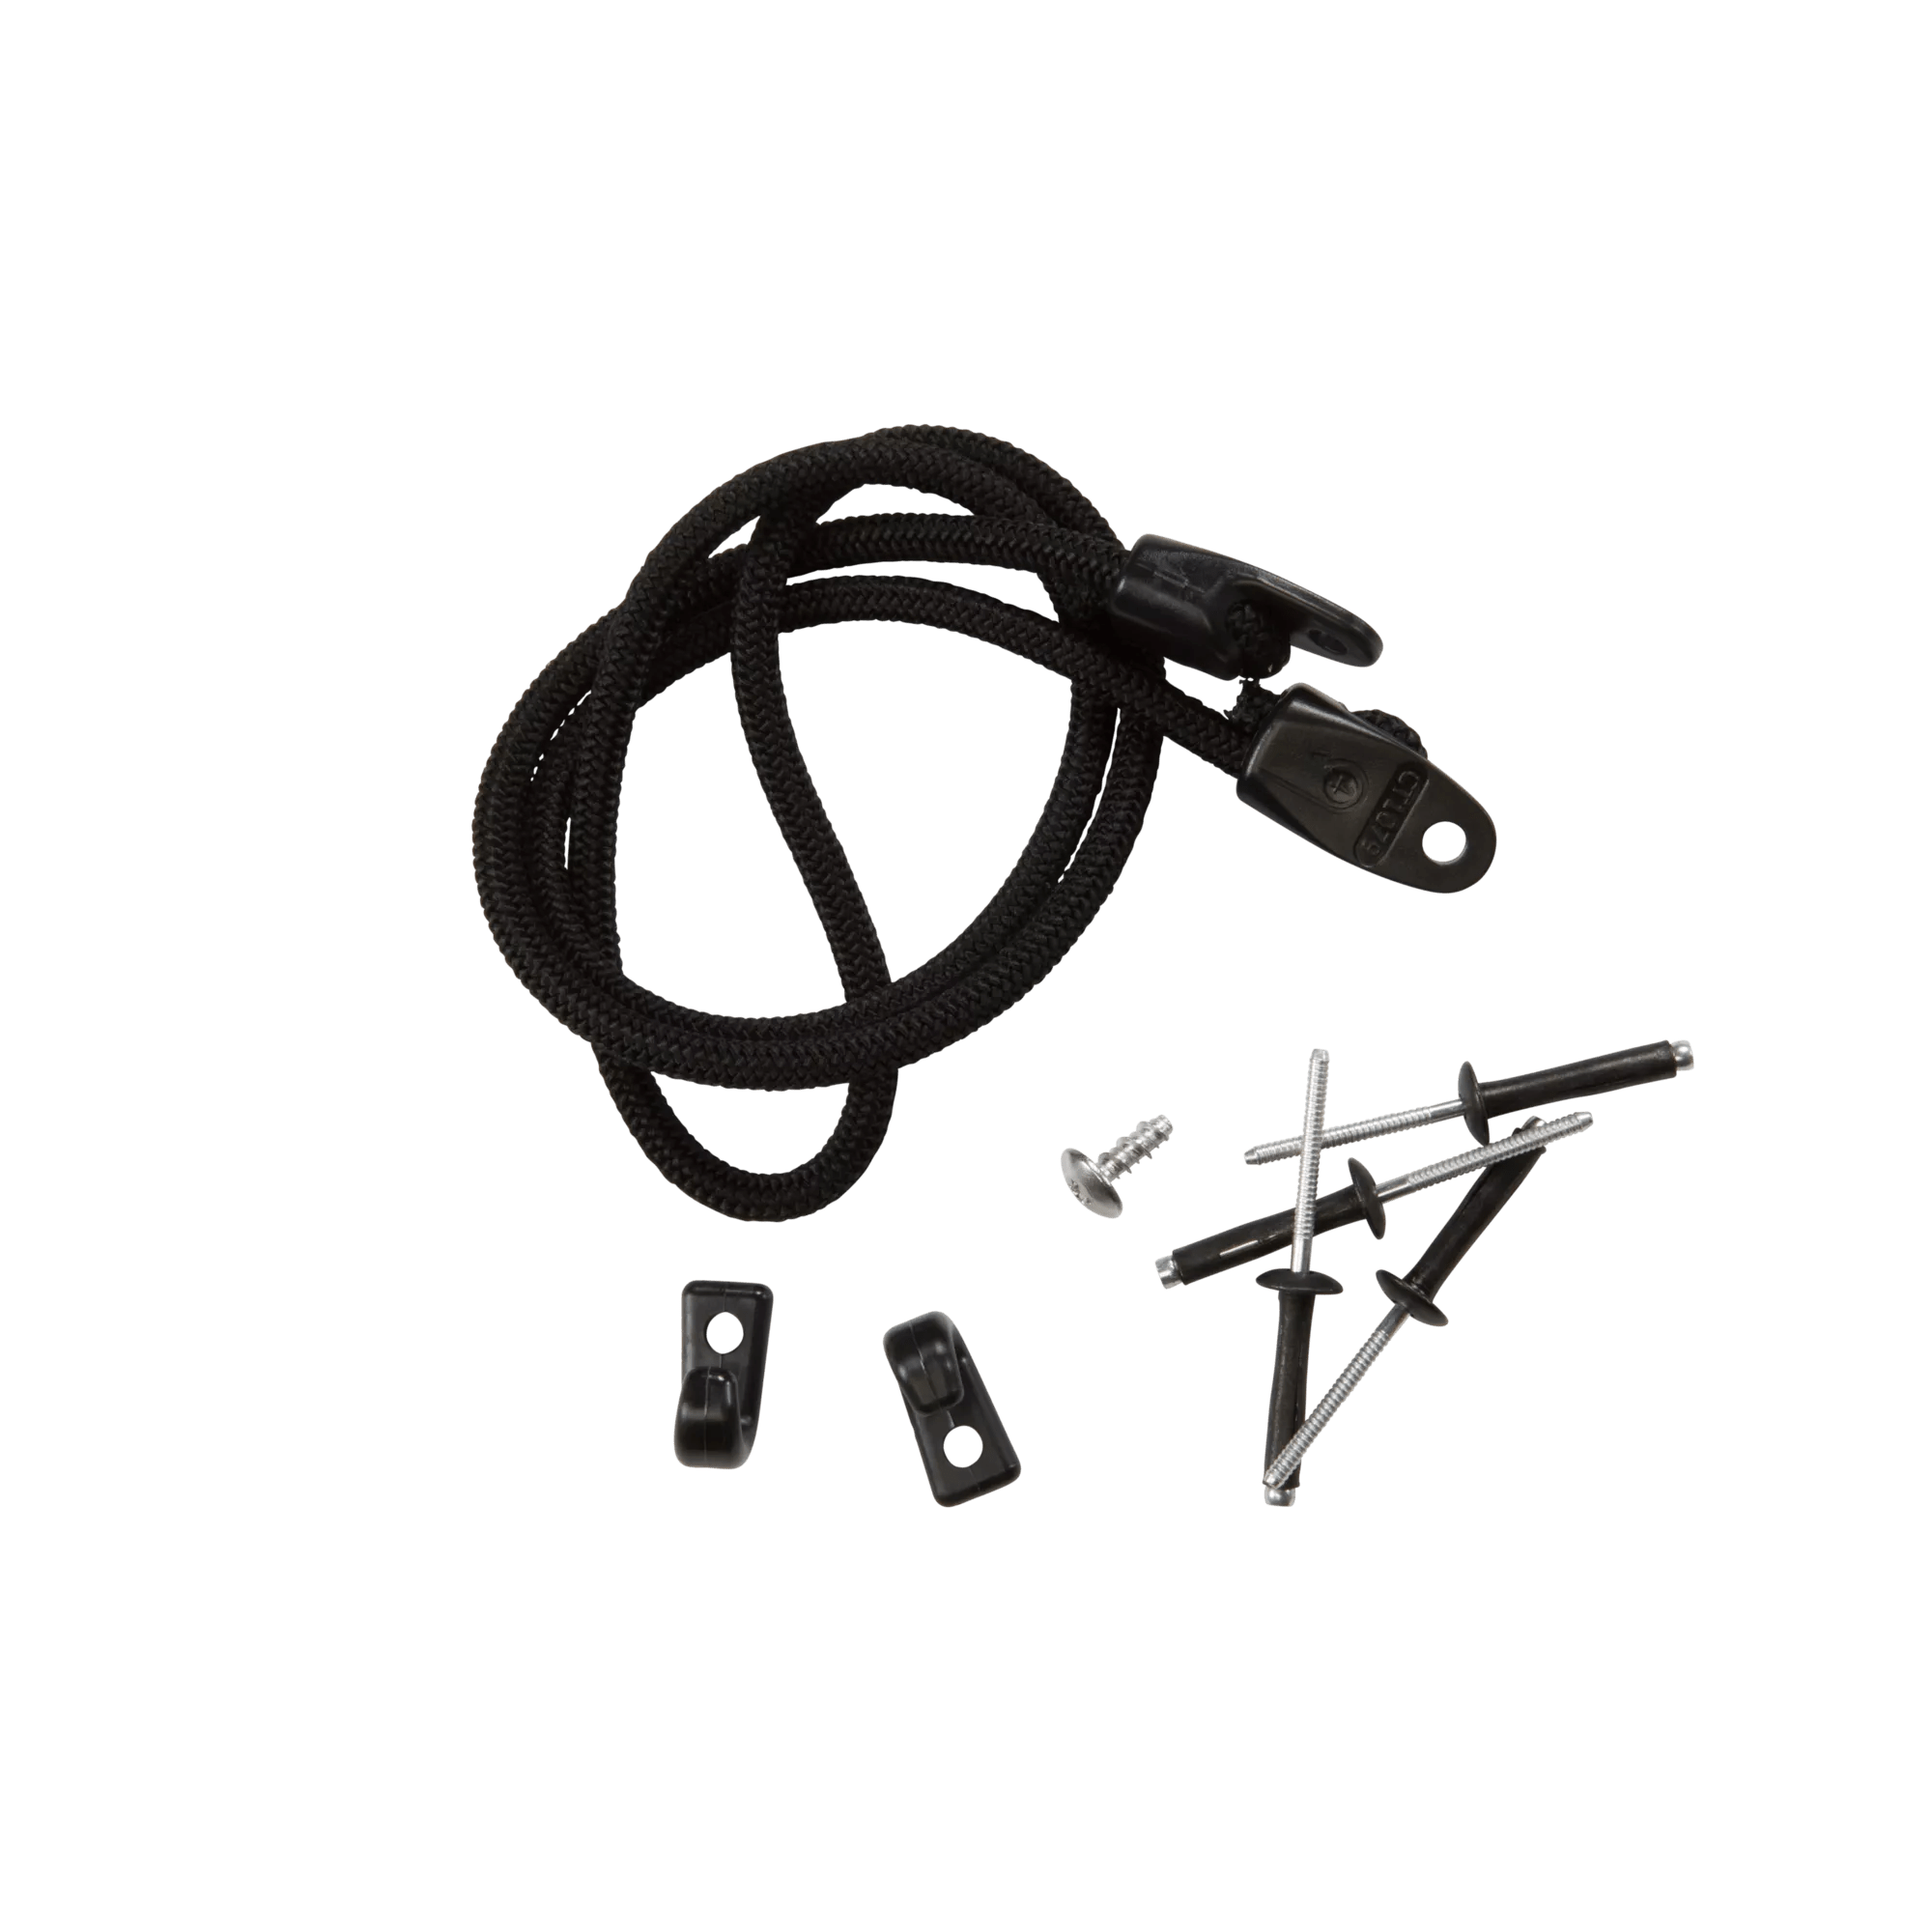 PELICAN - Black 36" (91.4 cm) Tank Well Bungee Cord -  - PS1827 - ISO